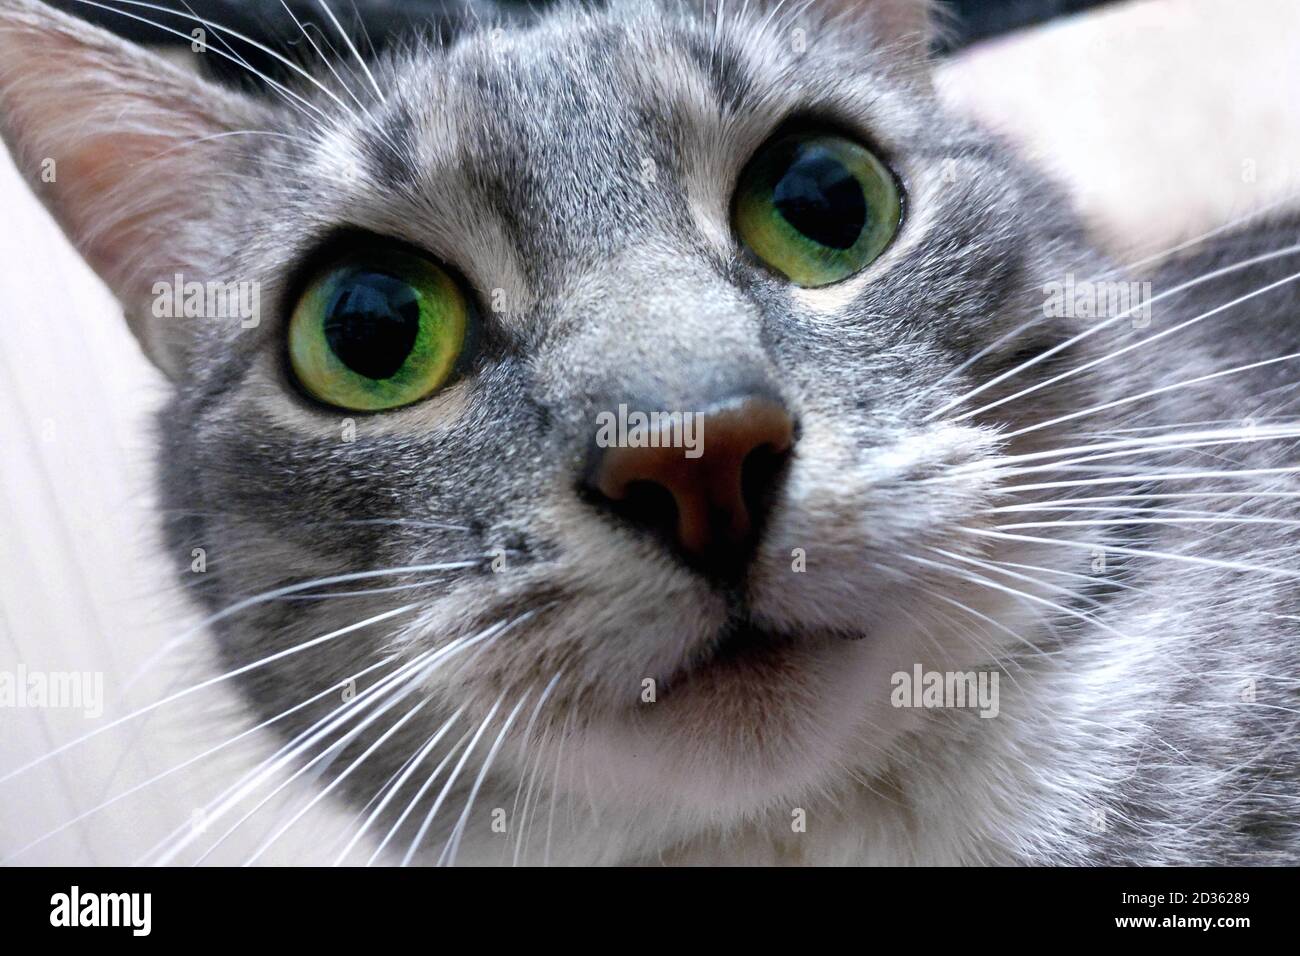 Big cat face with green eyes. Funny gray cat looks at the camera in  surprise. Portrait of a pet close-up, macro photo Stock Photo - Alamy